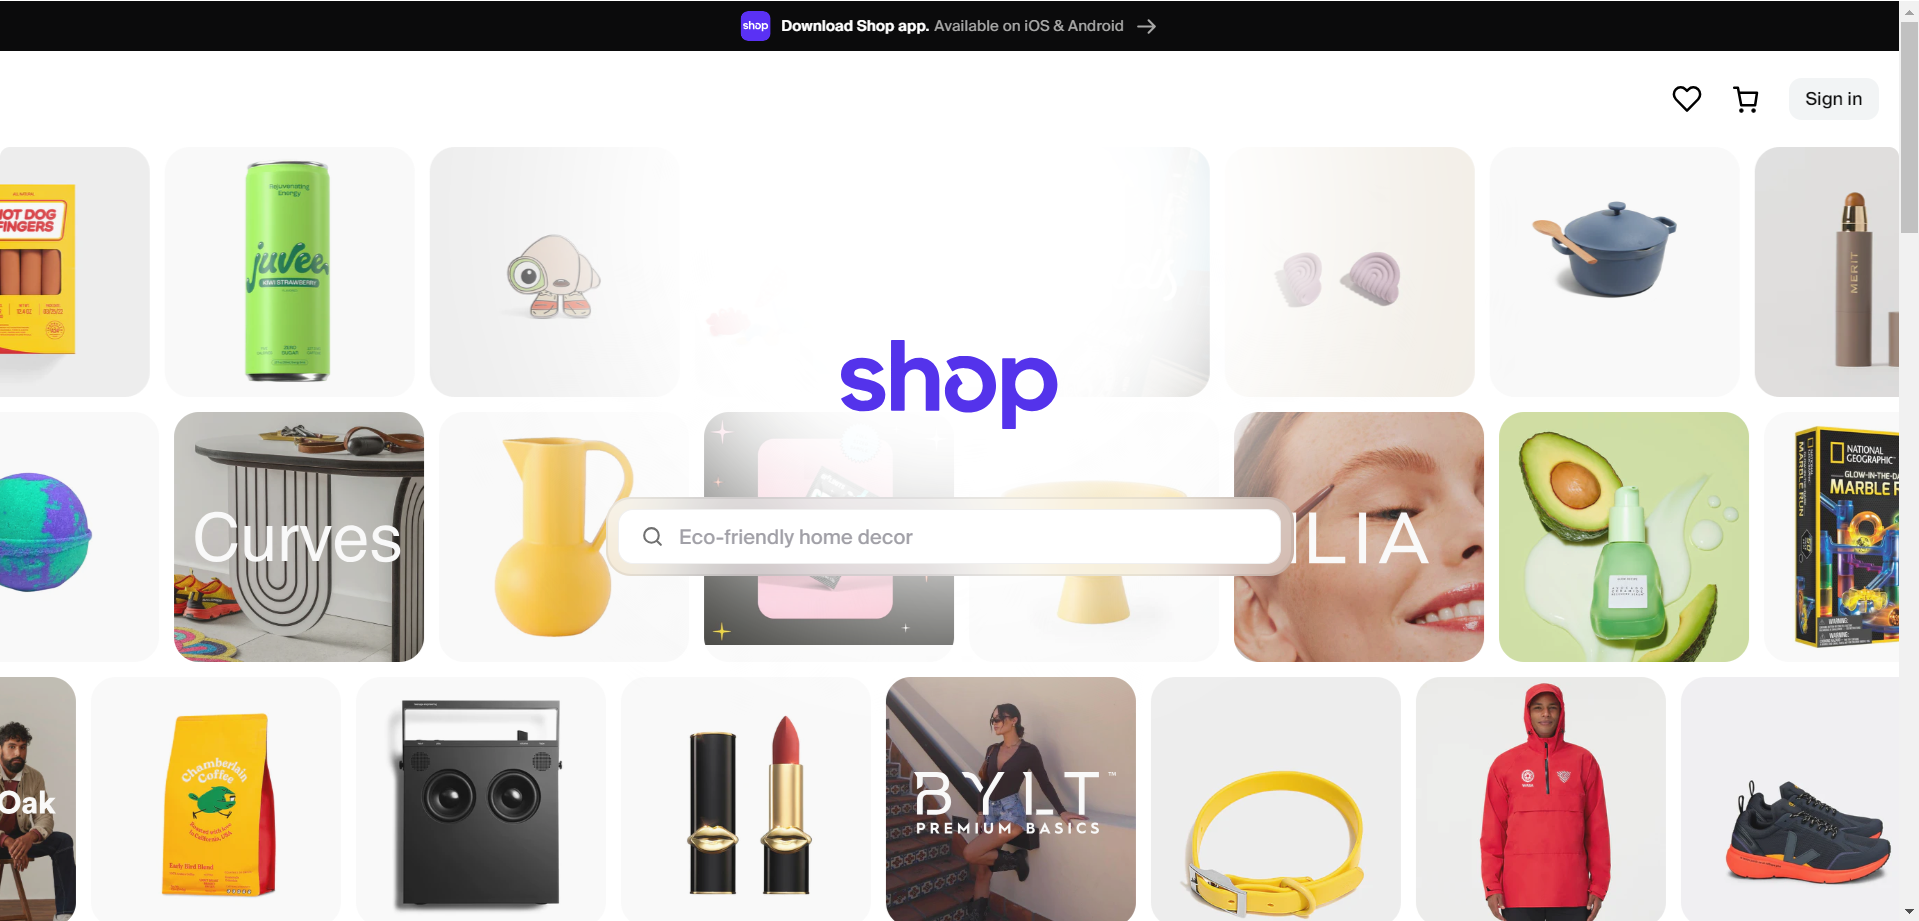 An Image of the Shop App